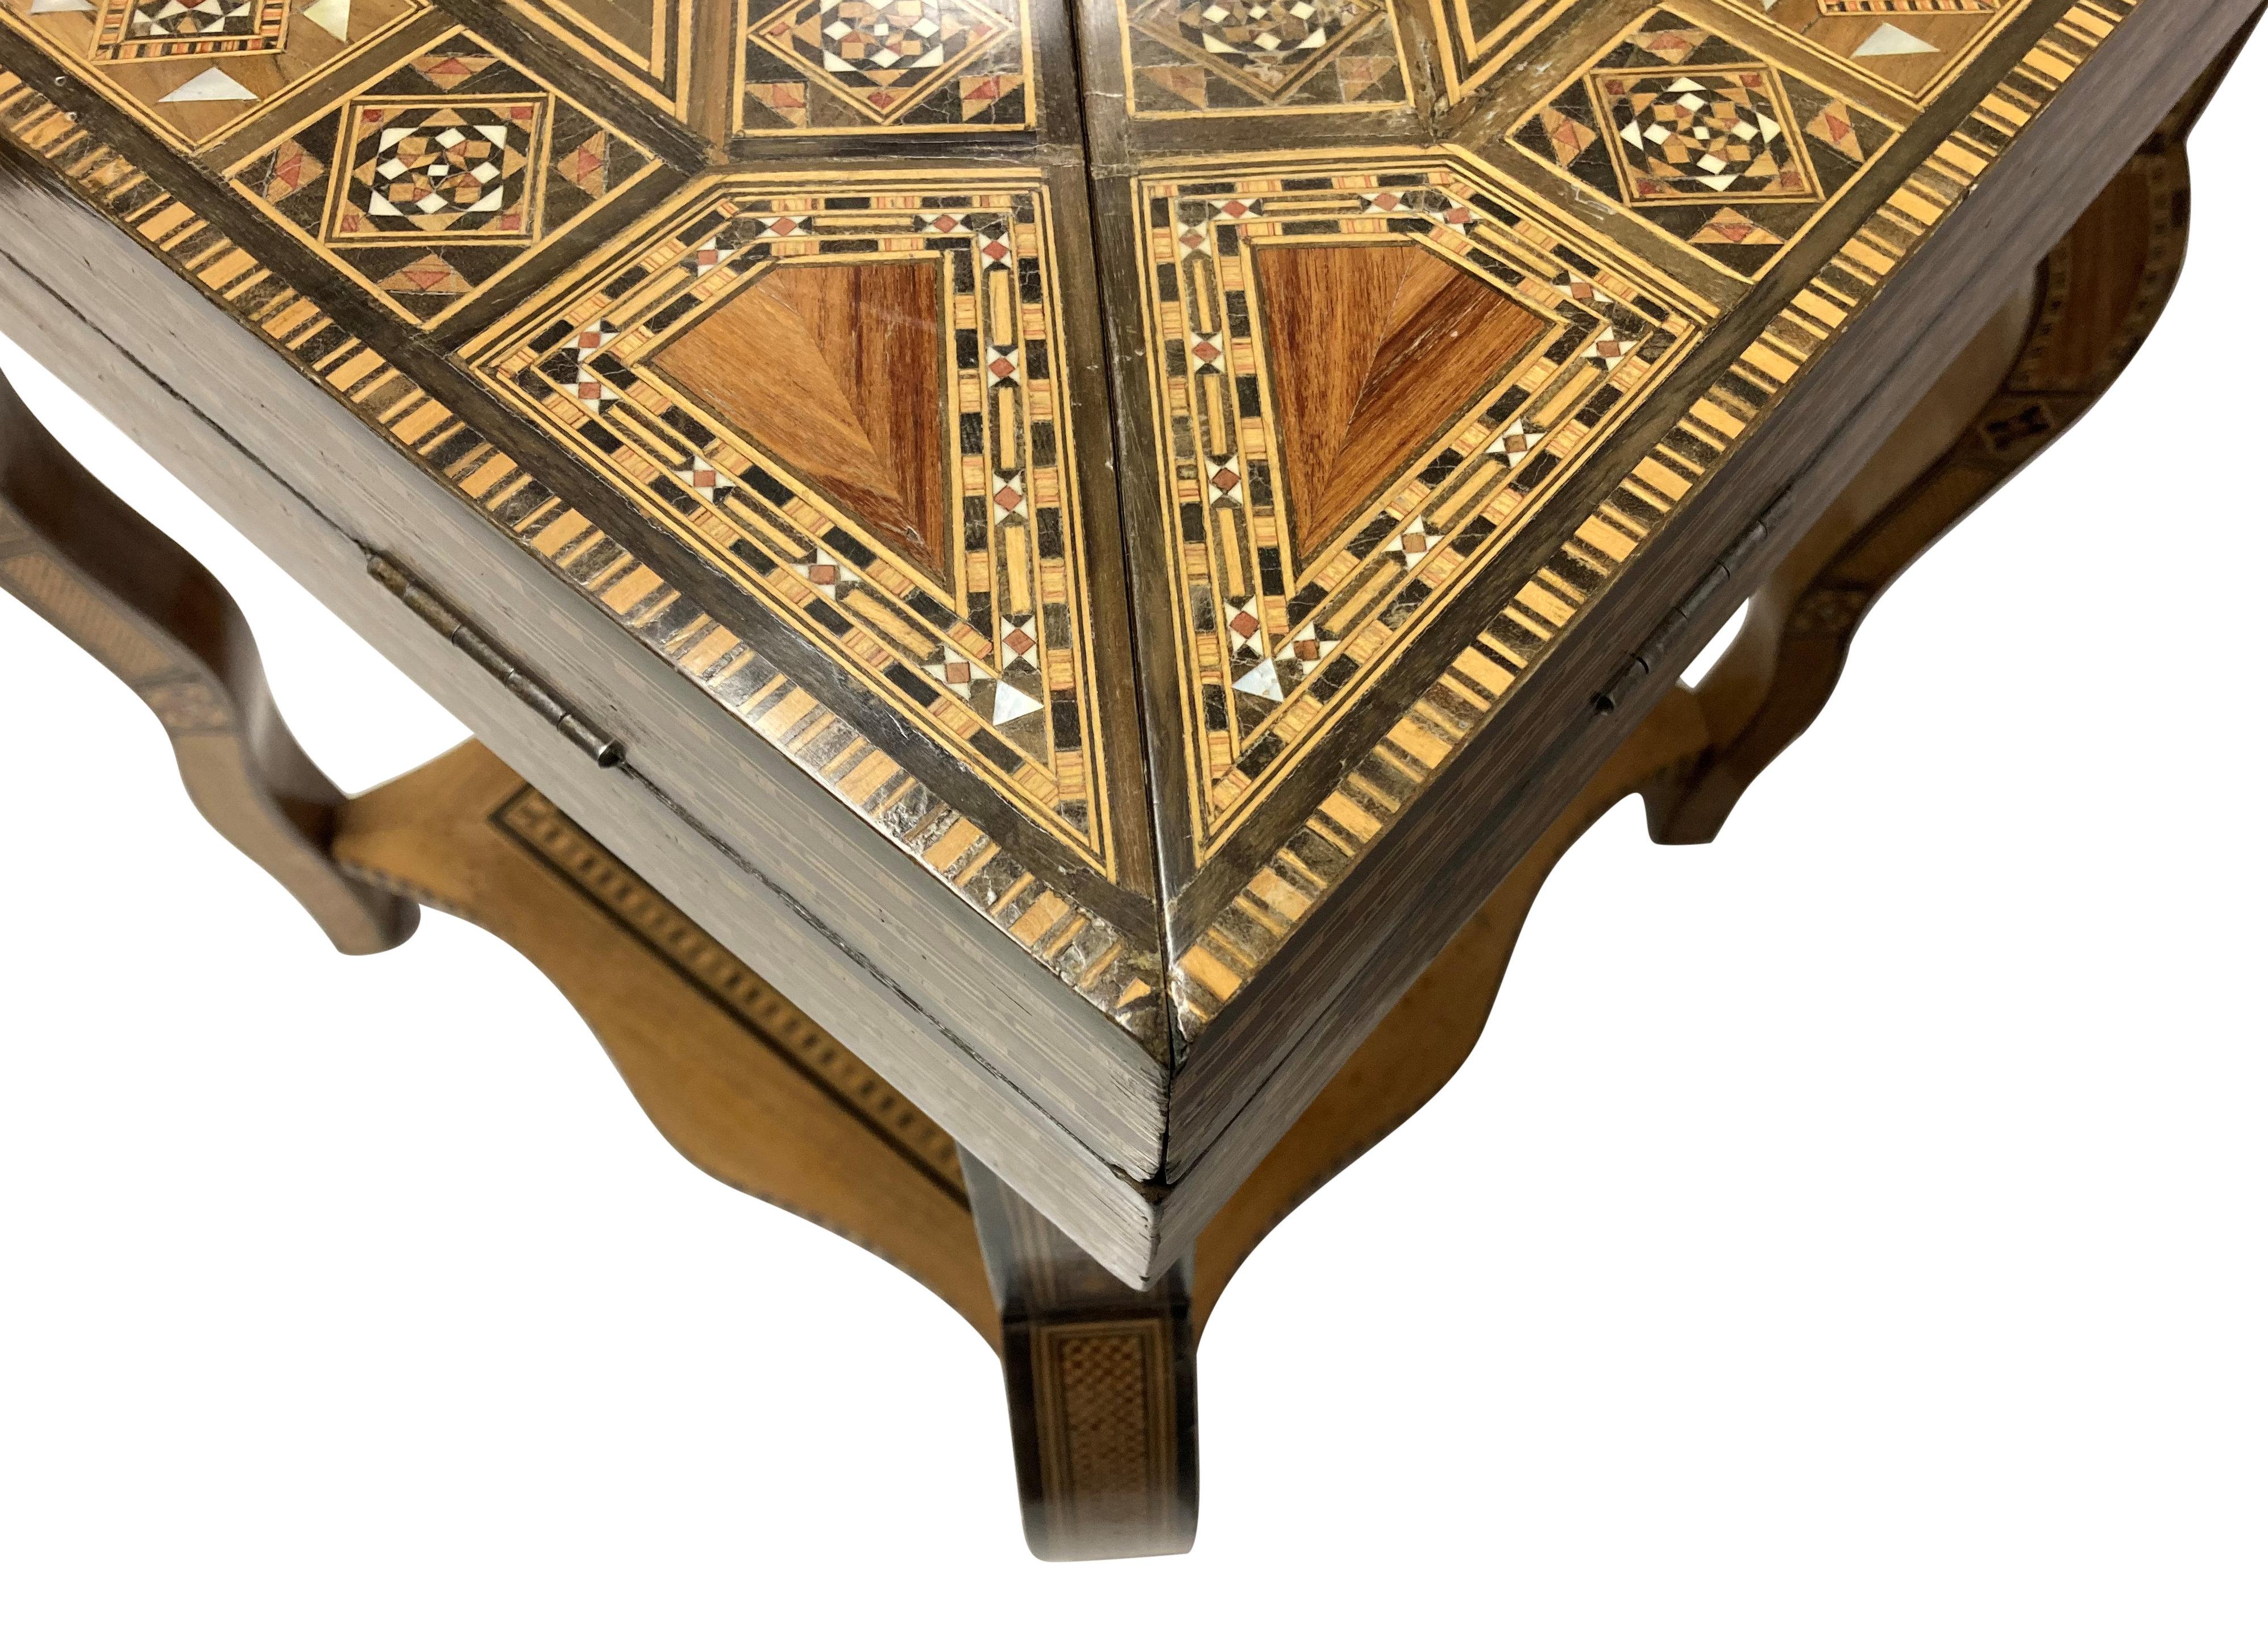 A Moorish games table of fine quality on cabriole legs, with a lower shelf and envelope top, opening to reveal various games layouts, including a card table. Comprised mainly of olive wood, with hardwood and bone micro-mosaic inlay. Beautifully